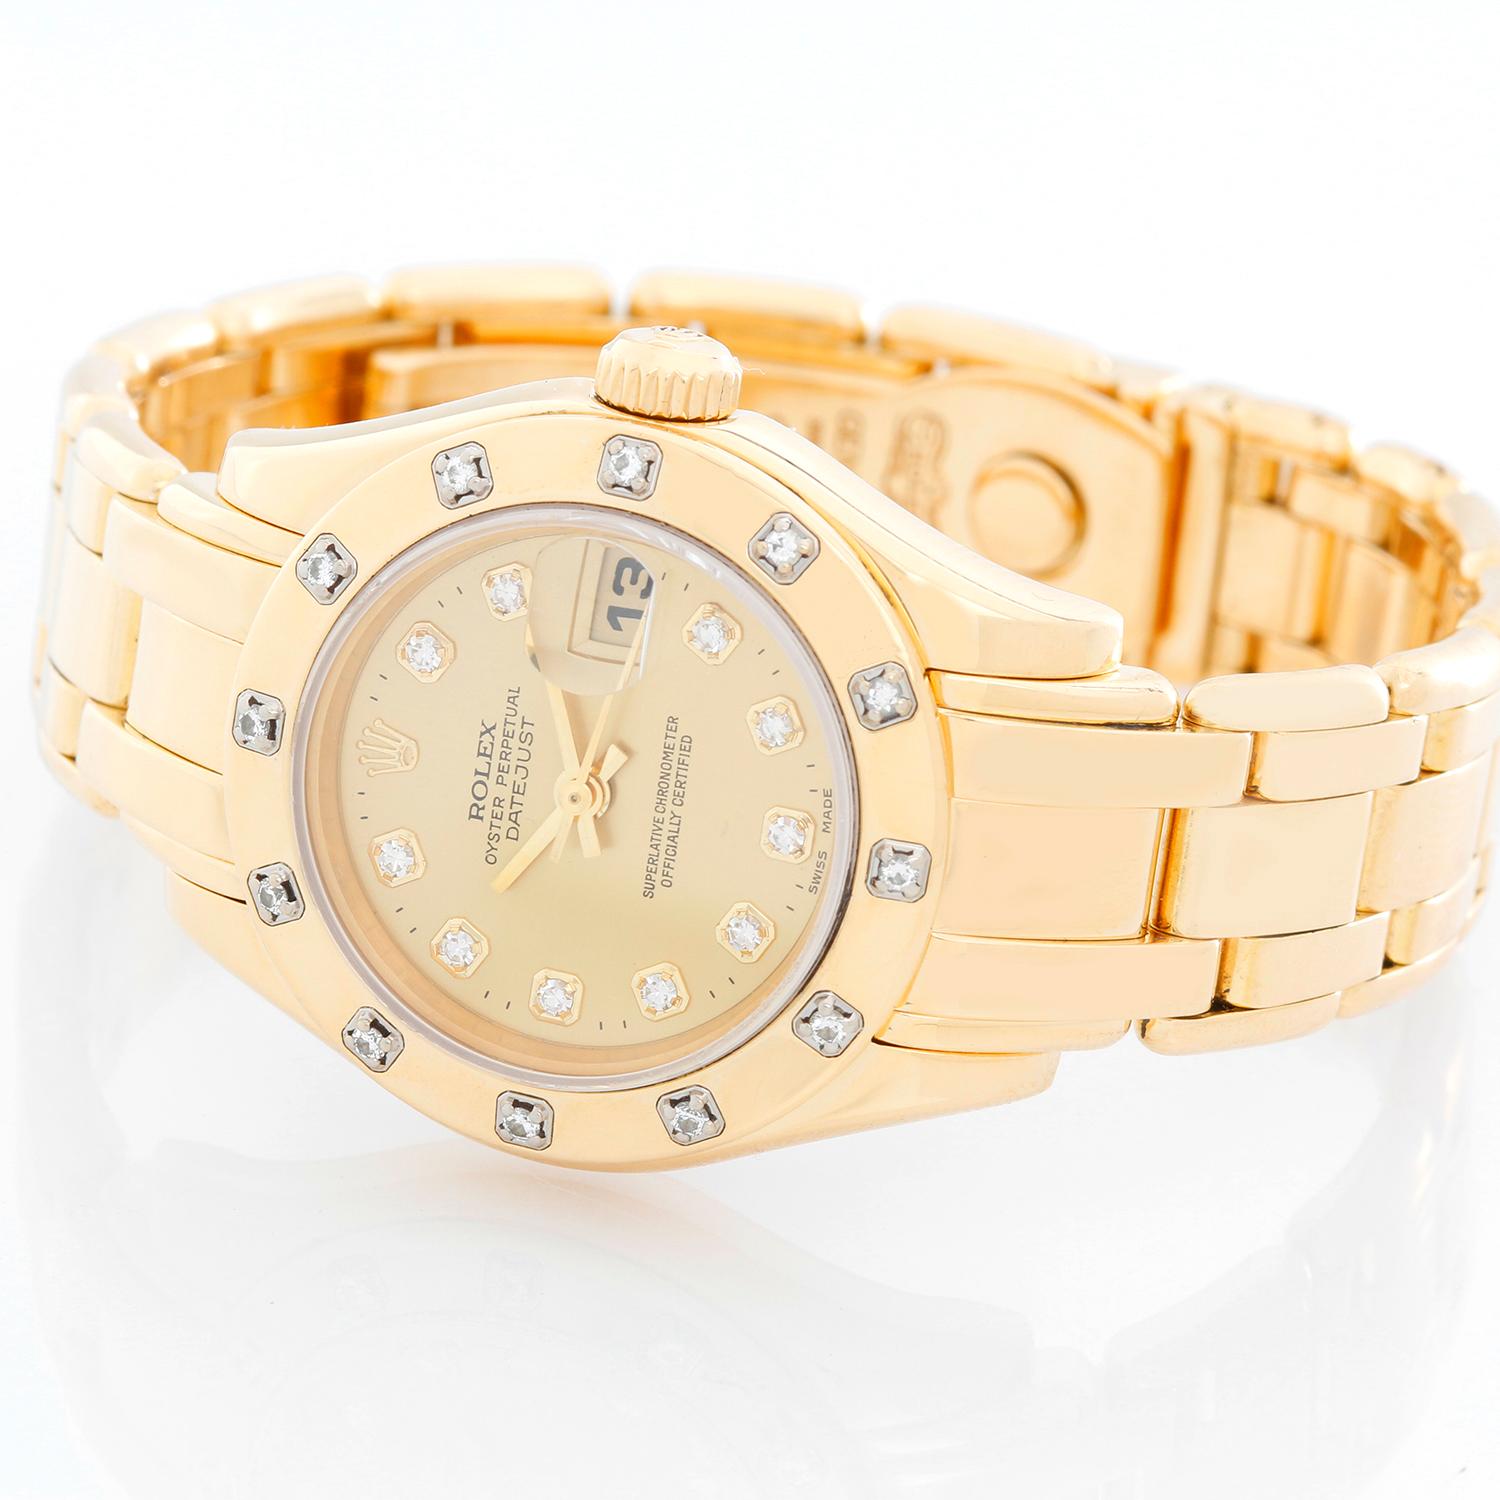 Rolex Ladies Pearlmaster Yellow Gold & Diamond Watch 69318 - Automatic winding. 18k yellow gold case with factory 12-diamond bezel (29mm diameter). Factory champagne diamond dial. 18k yellow gold Pearlmaster bracelet. Pre-owned with box and books.